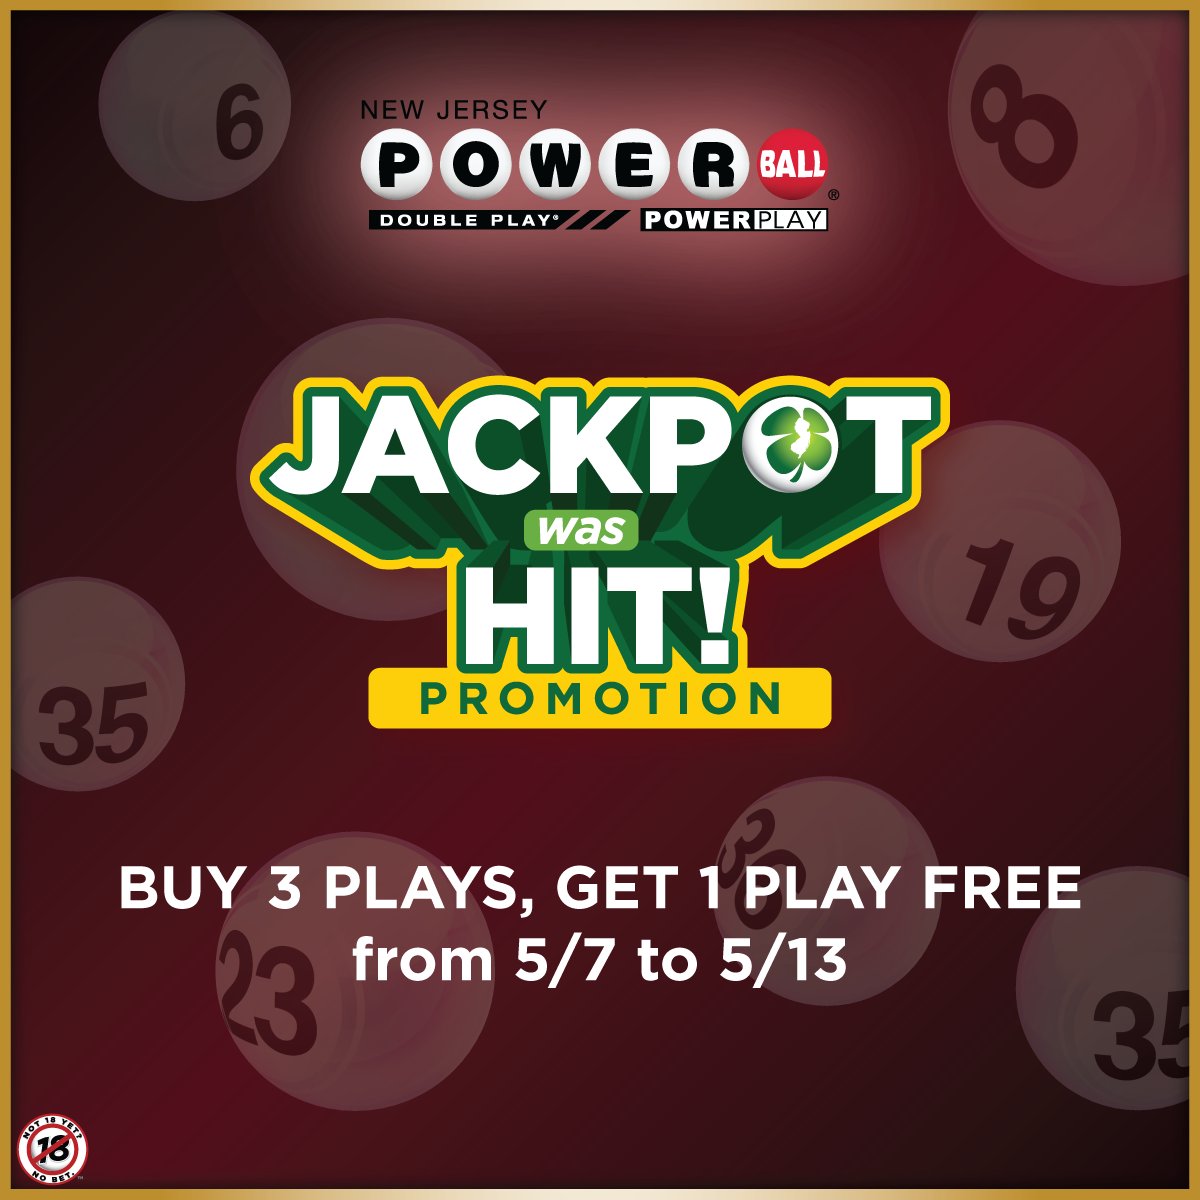 The Powerball jackpot was hit, triggering our Jackpot Was Hit! Powerball Promotion. From 5/7 to 5/13, if you purchase exactly 3 plays on a single #Powerball ticket, you will receive 1 FREE $2 play. 🙌 Restrictions apply. For promotion details, visit NJLottery.com/JackpotHit.